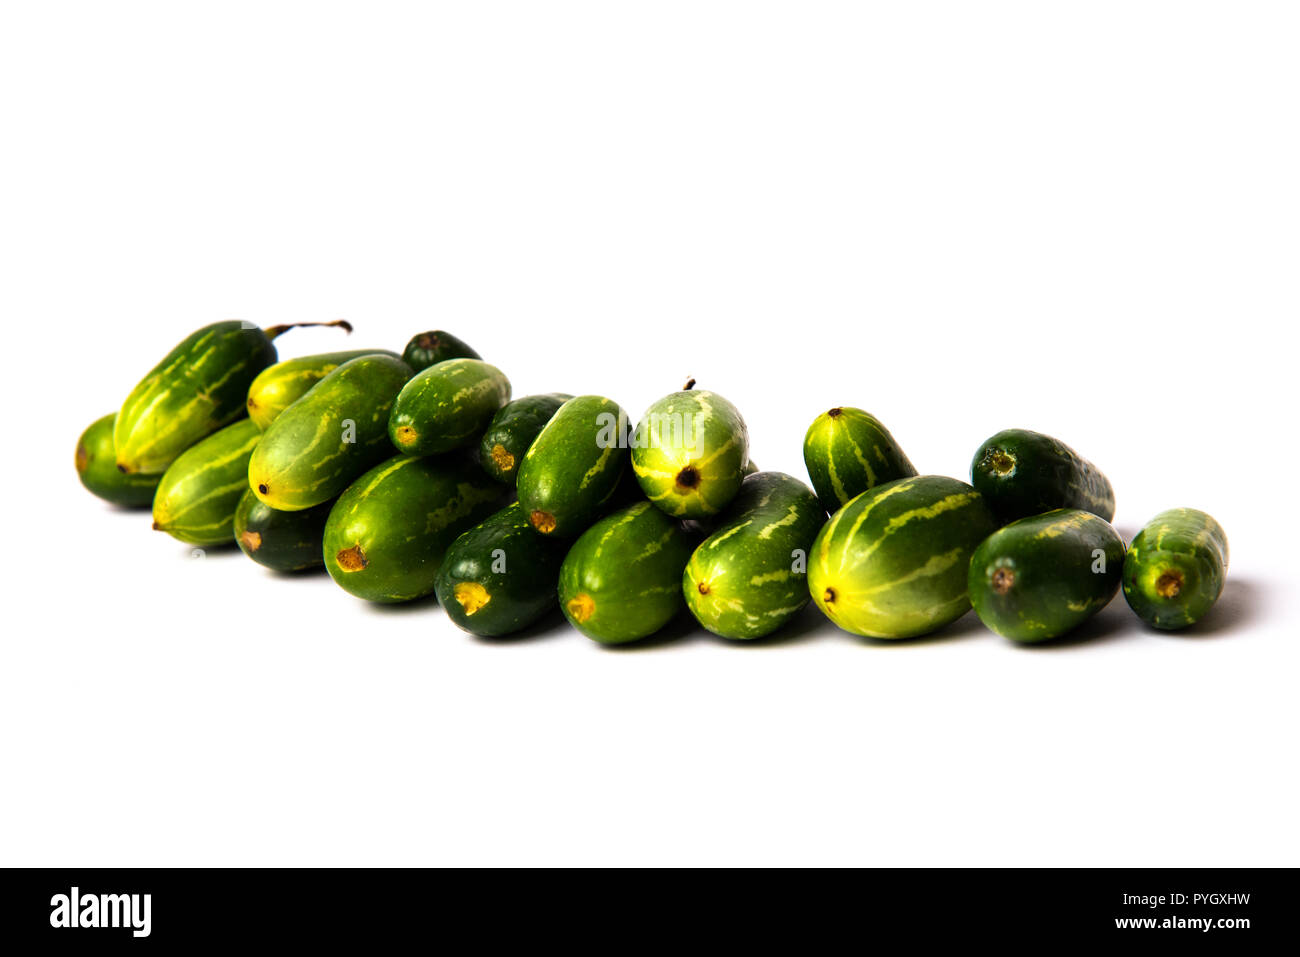 Pointed gourd vegetables isolated on white background Stock Photo